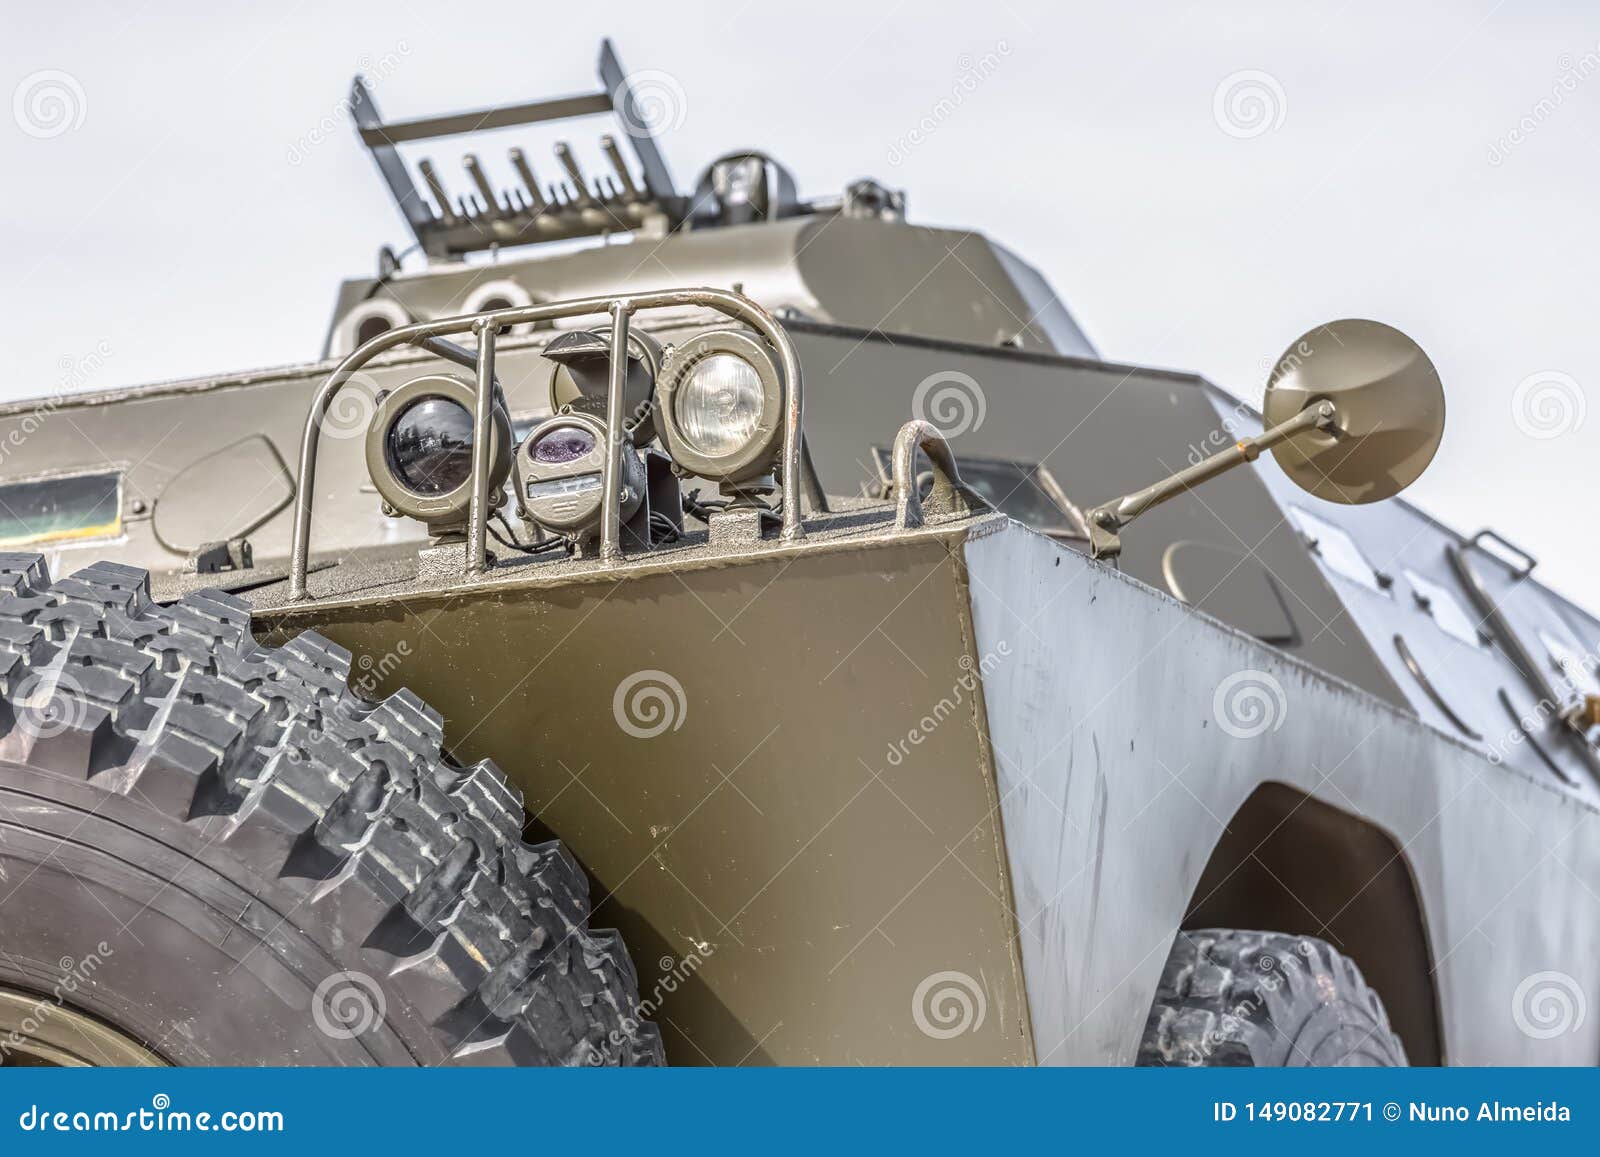 detailed front view of old armored military vehicle